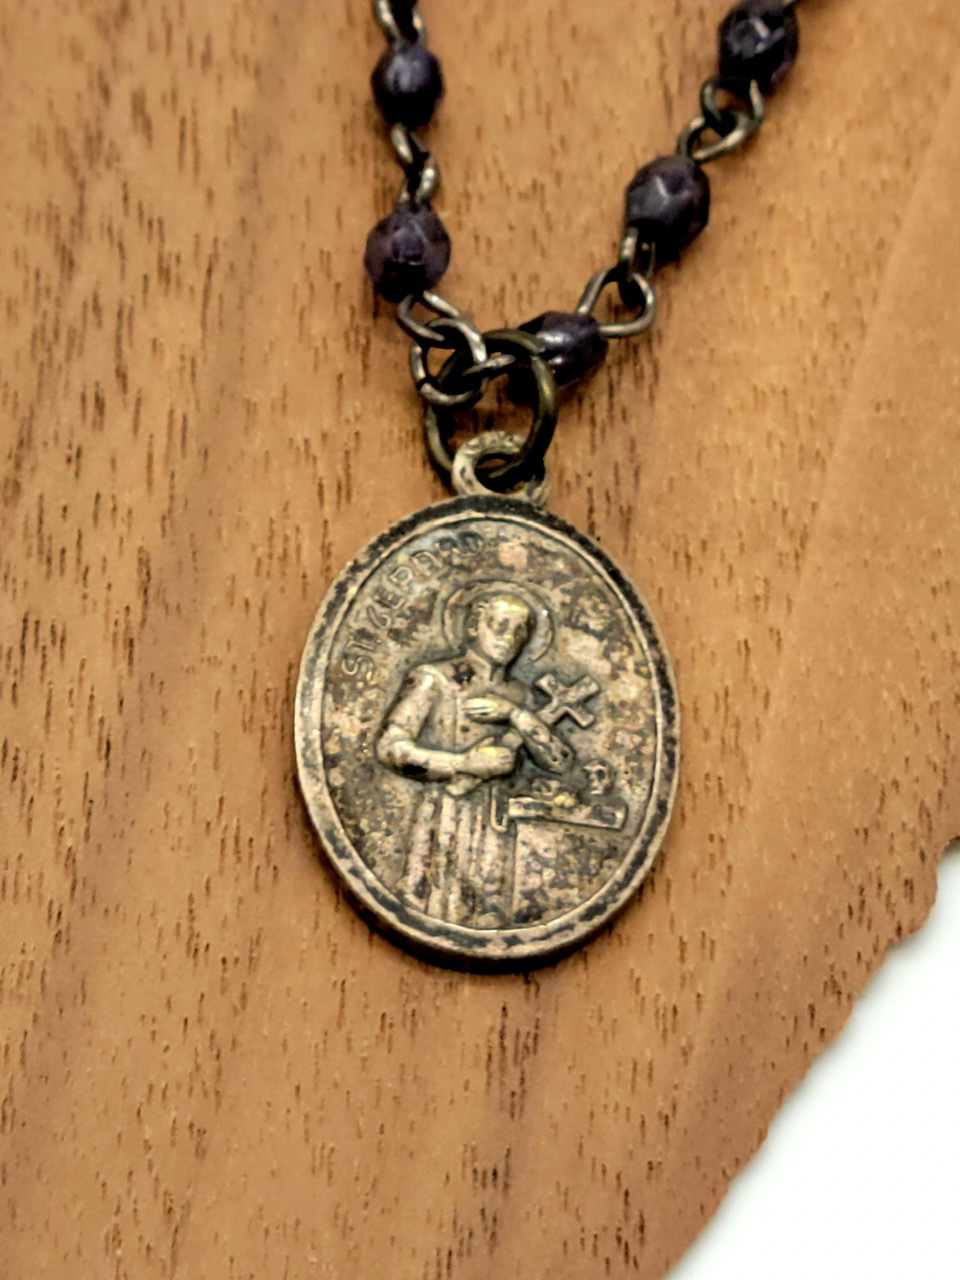 St Gerard Majella Round Patron Saint Medal Necklace by Bliss